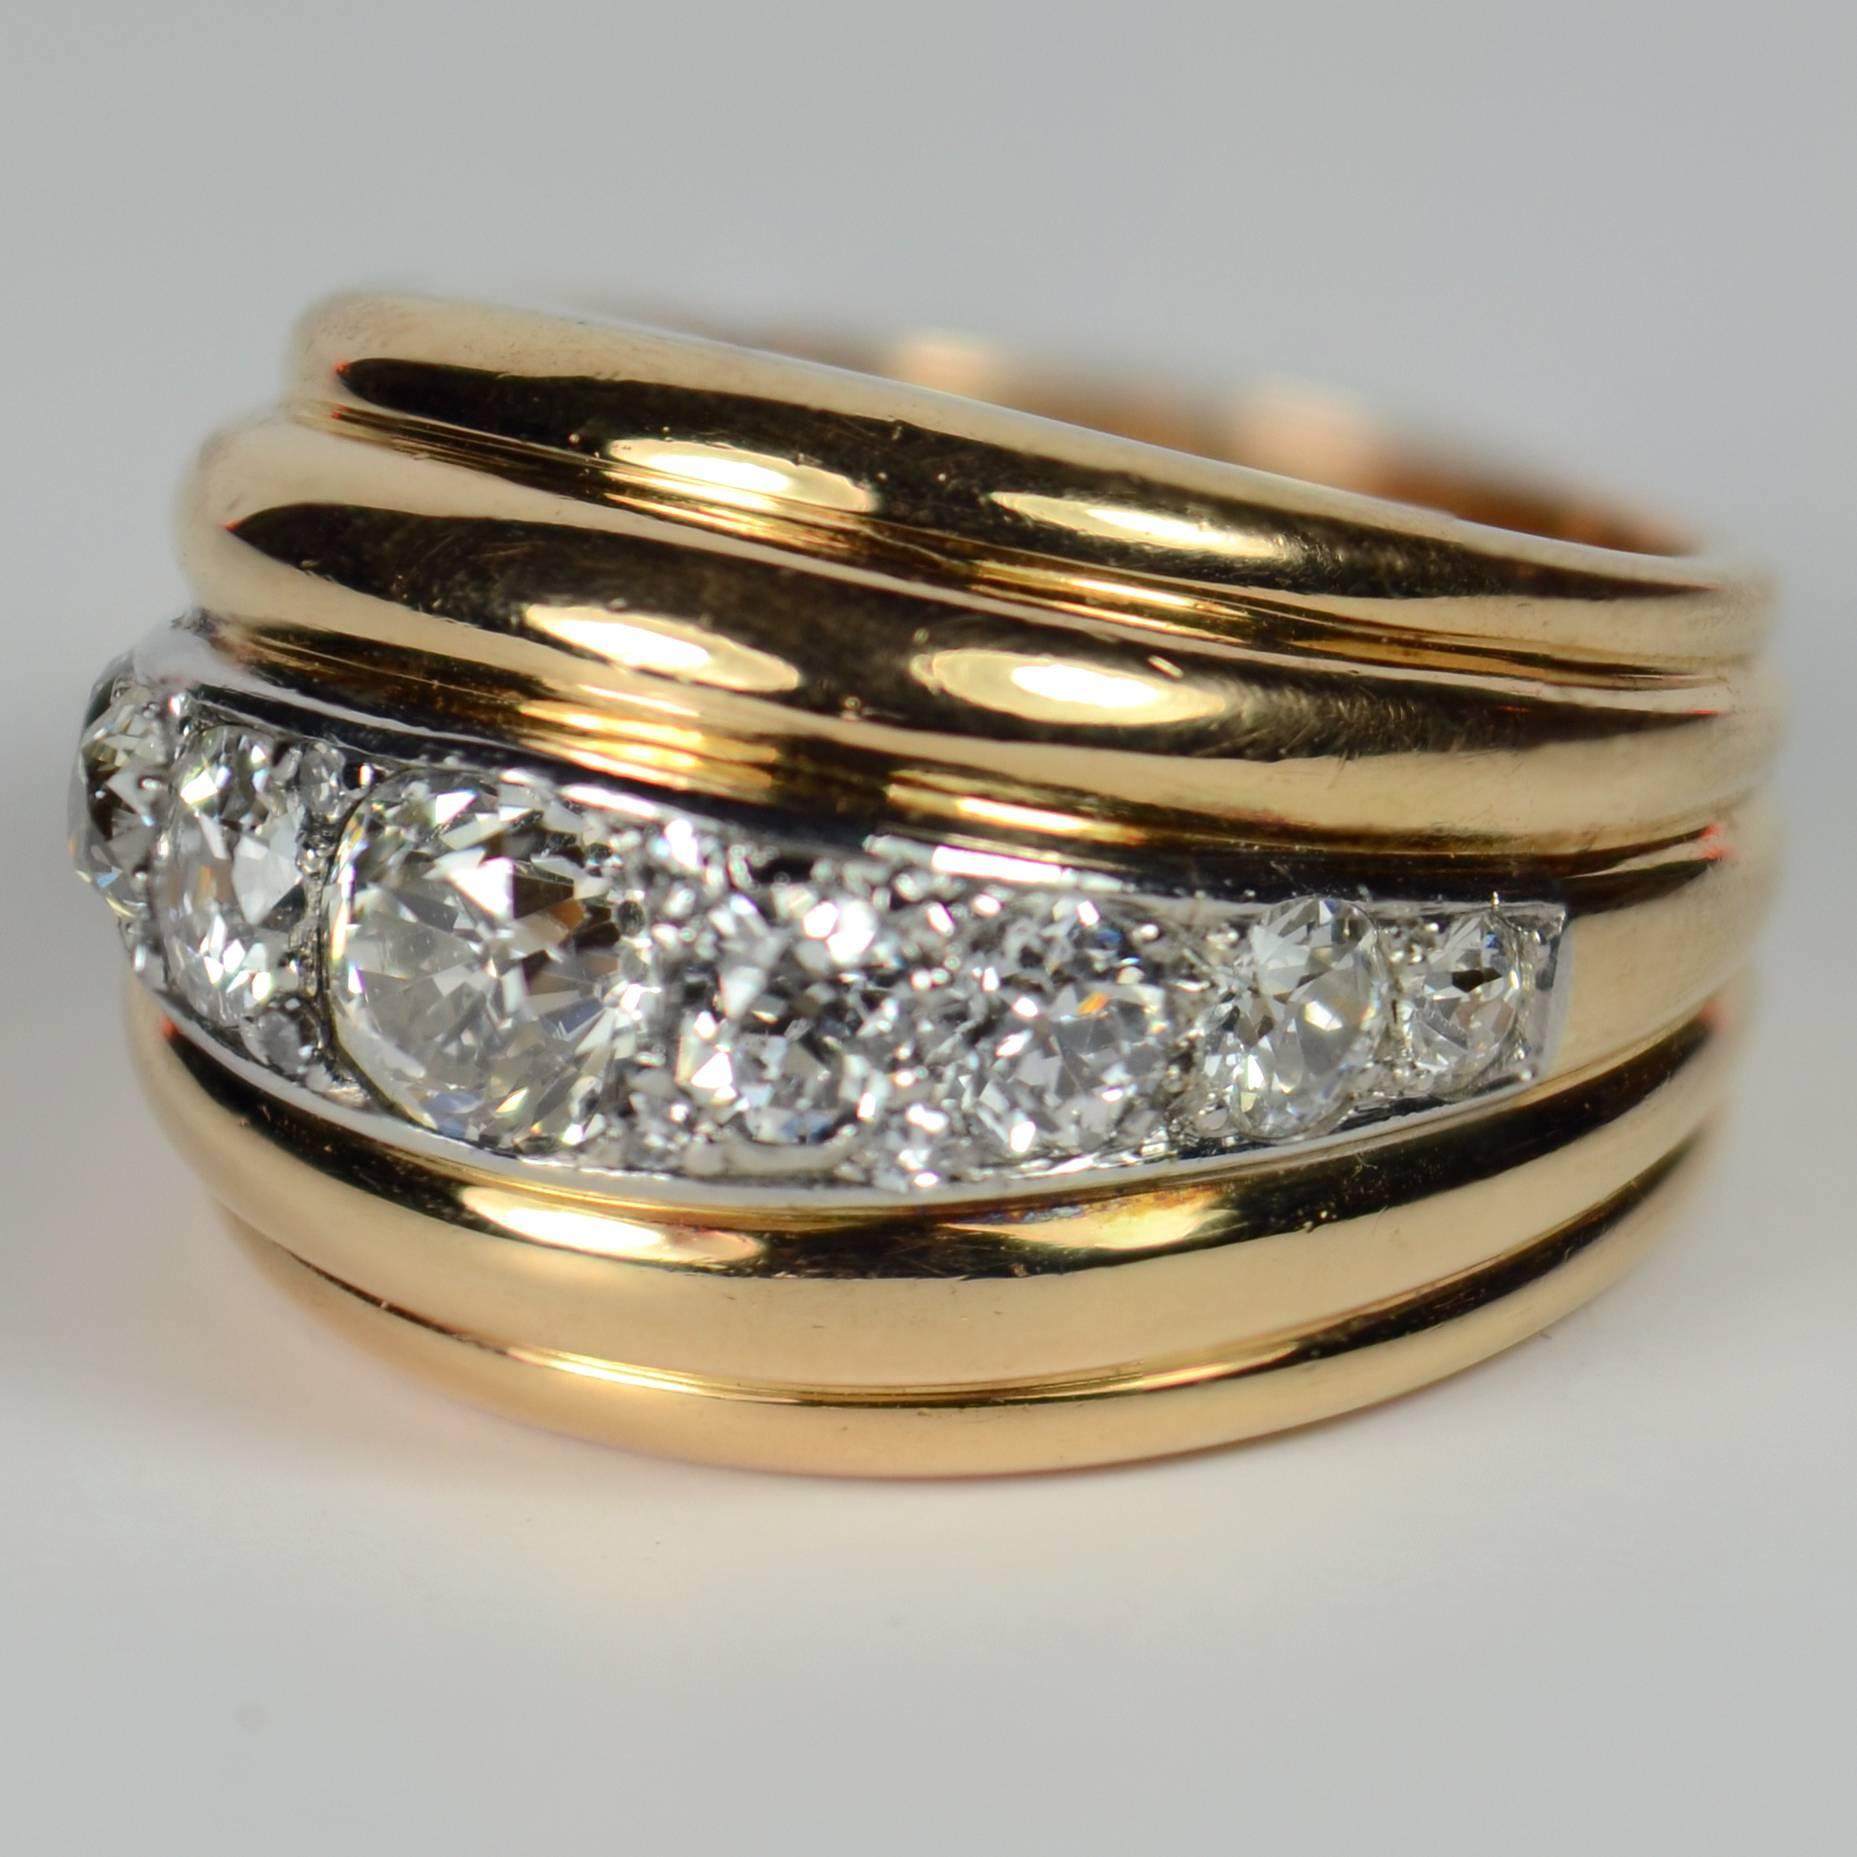 A dramatic gold and diamond dome ring in the style of Belperron, designed as five curving ridges, the central ridge set with diamonds in platinum.

The 9 main diamonds are old transitional cut stones, which are interspersed with 8 smaller single-cut